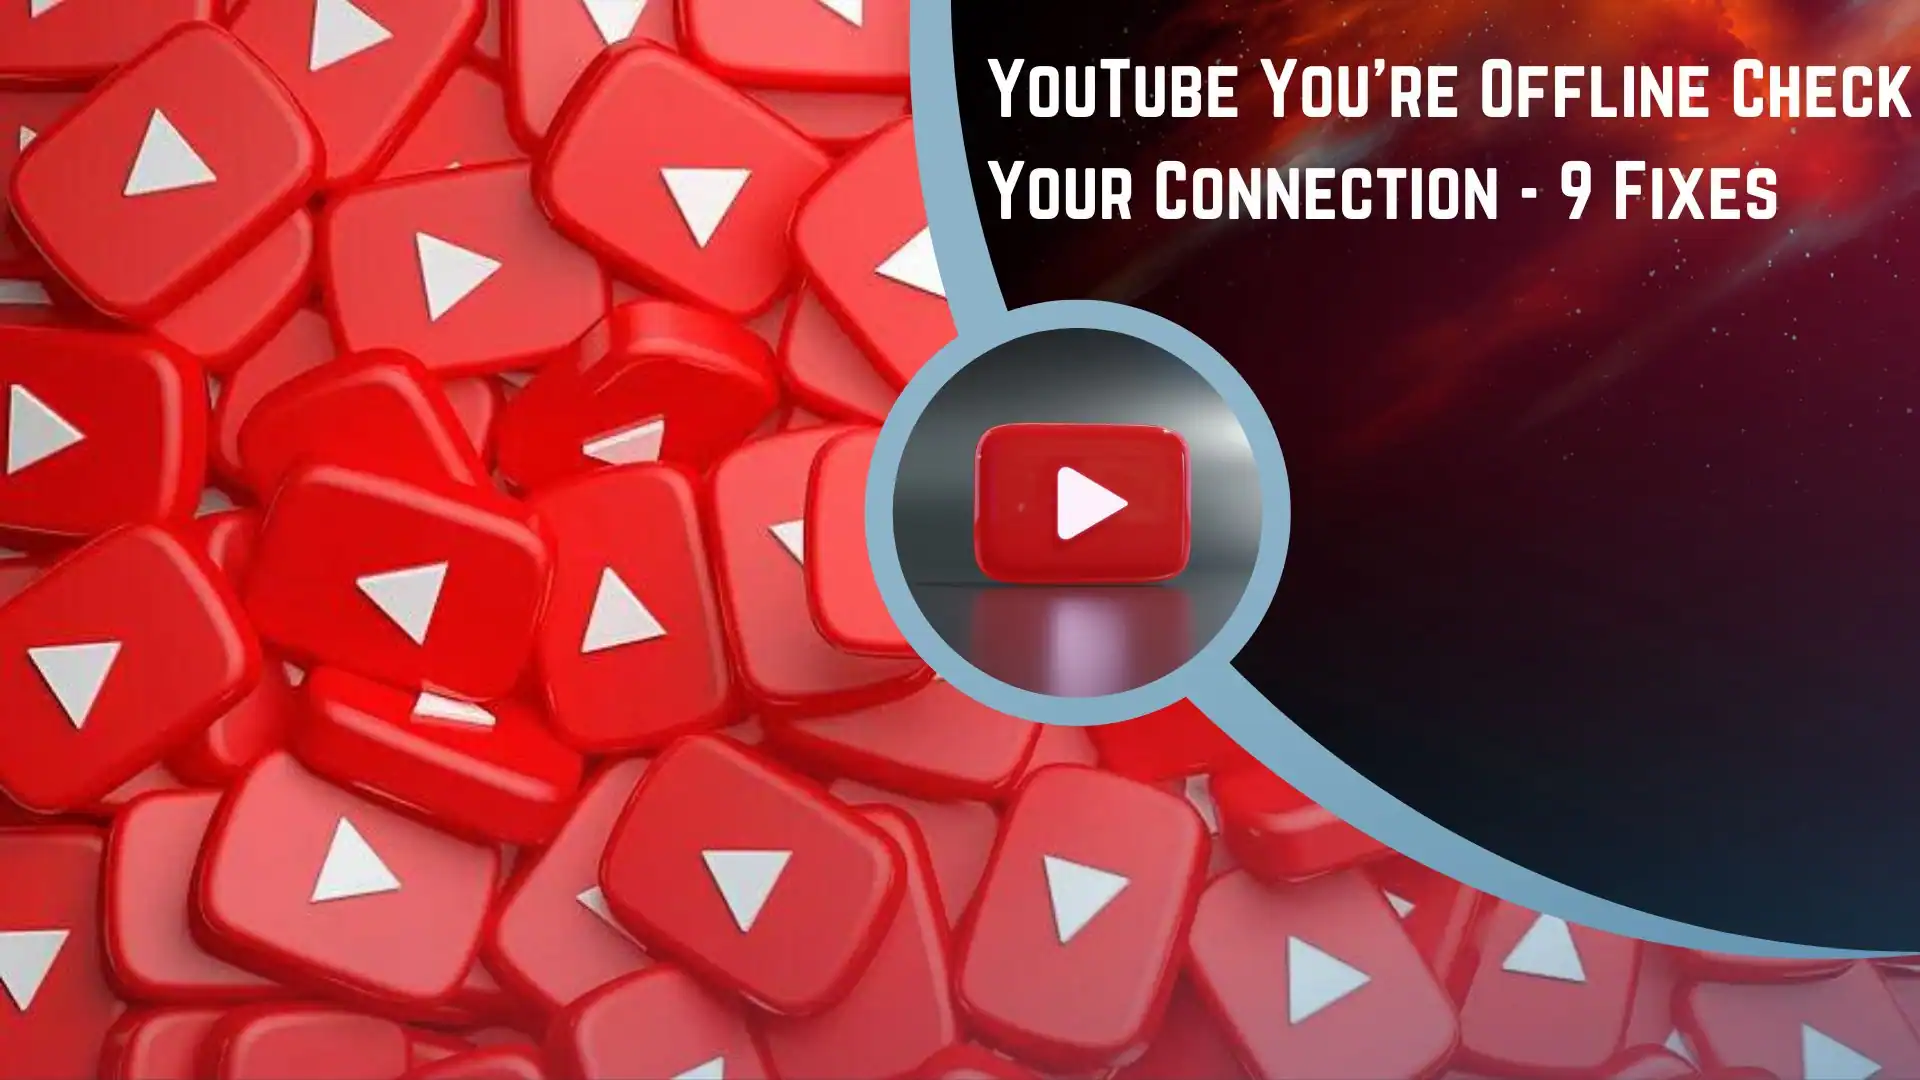 Youtube: Youtube You'Re Offline Check Your Connection - 9 Fixes